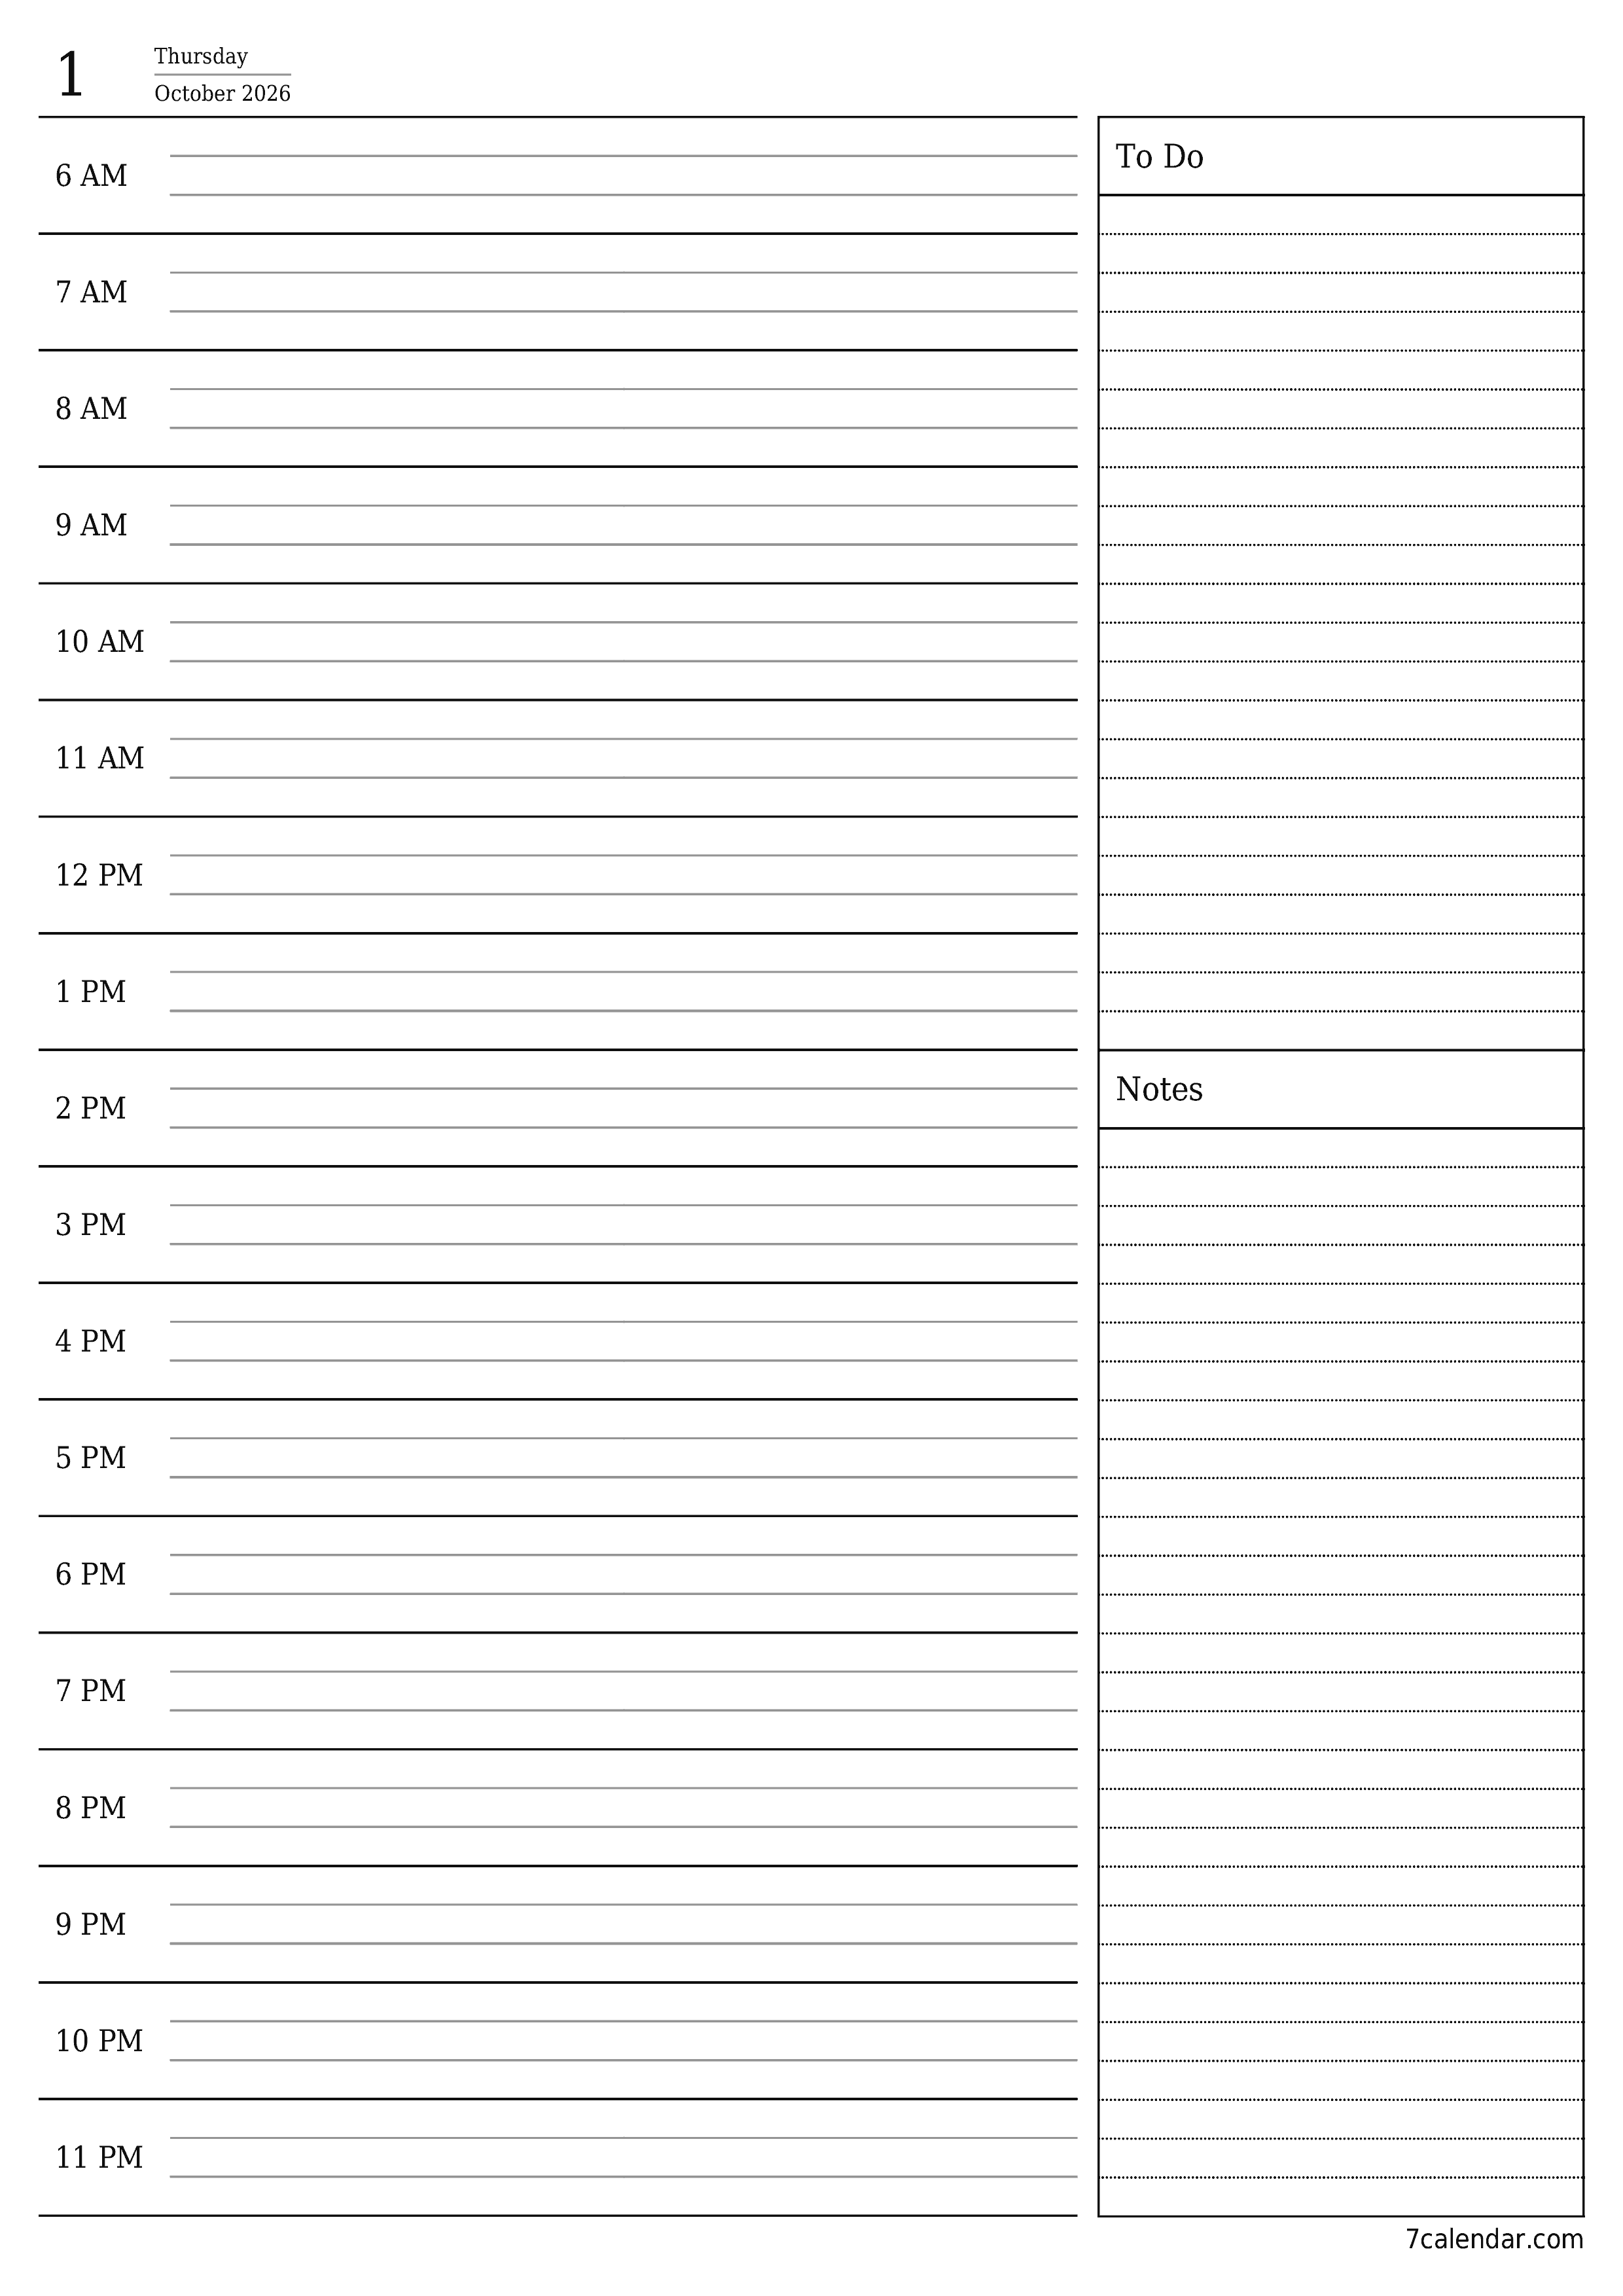 Blank daily printable calendar and planner for day October 2026 with notes, save and print to PDF PNG English